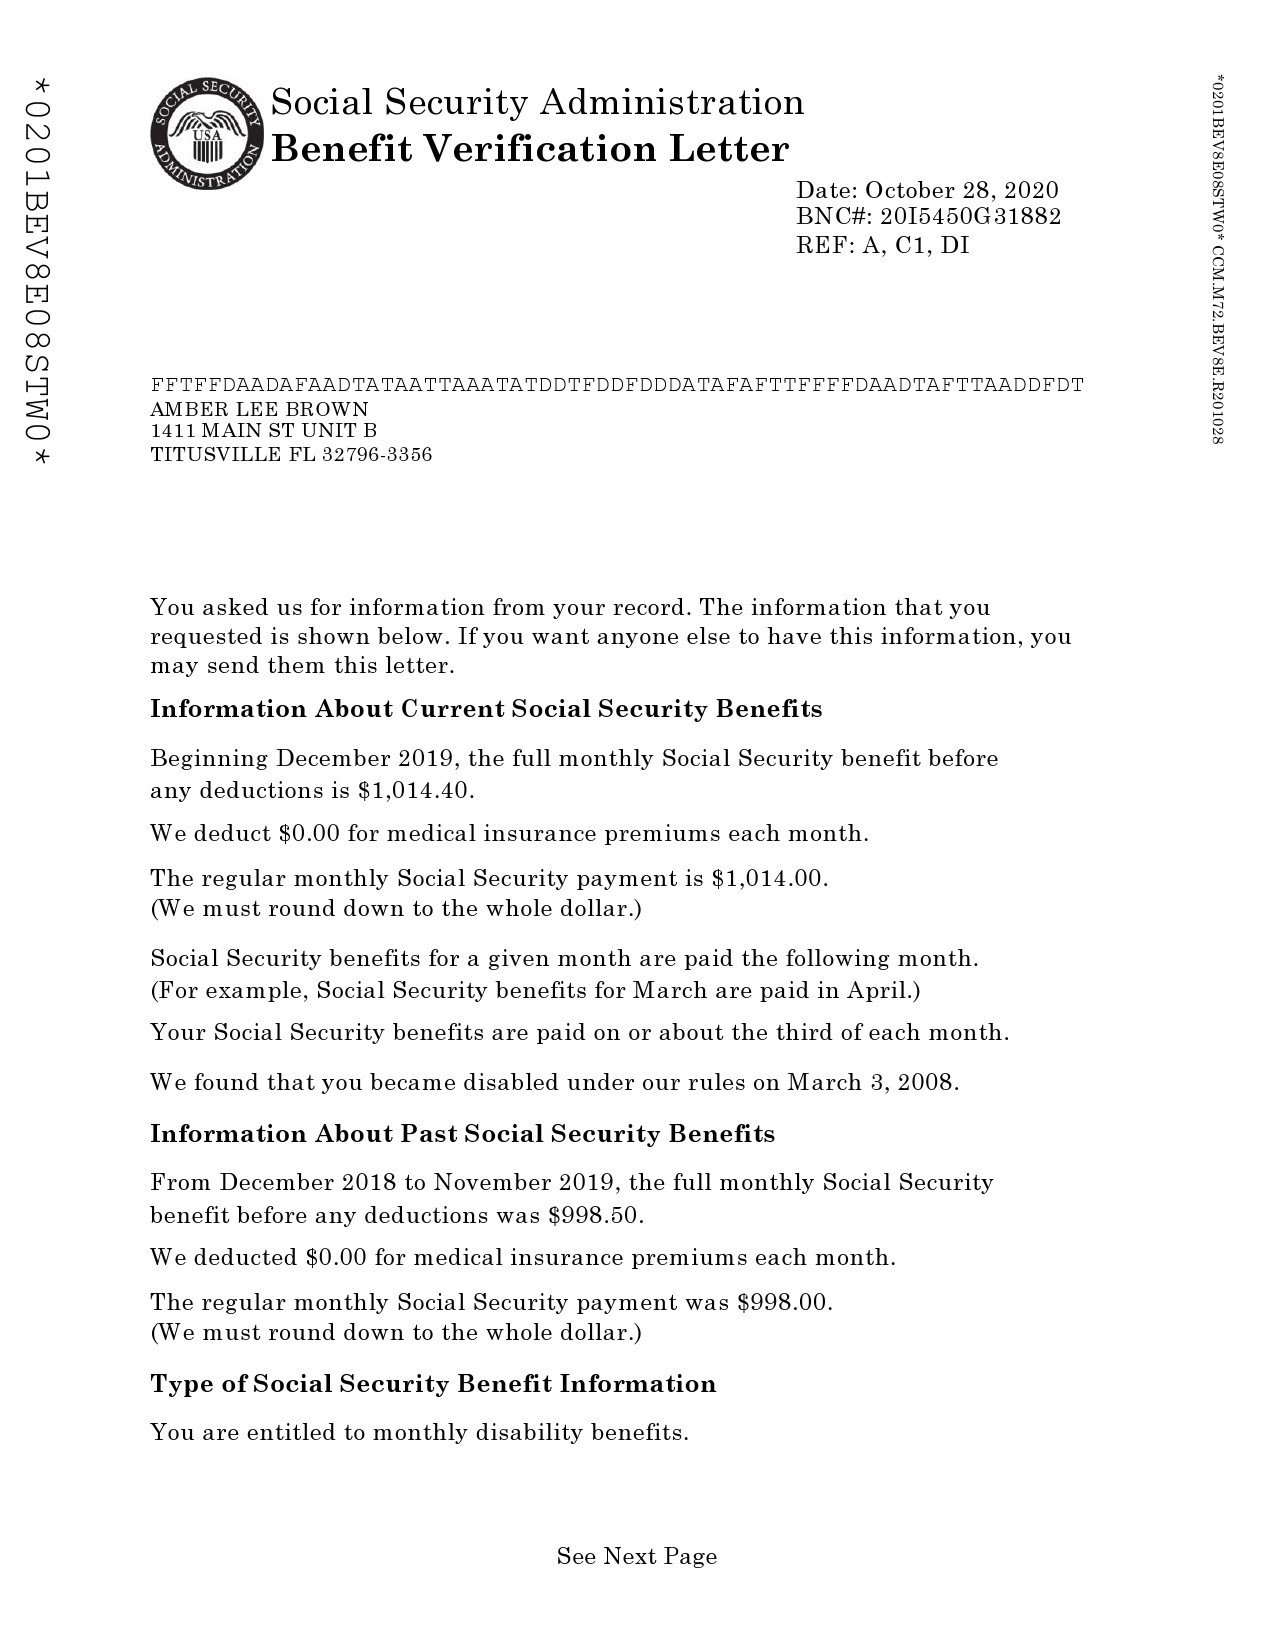 Free social security number verification letter 03